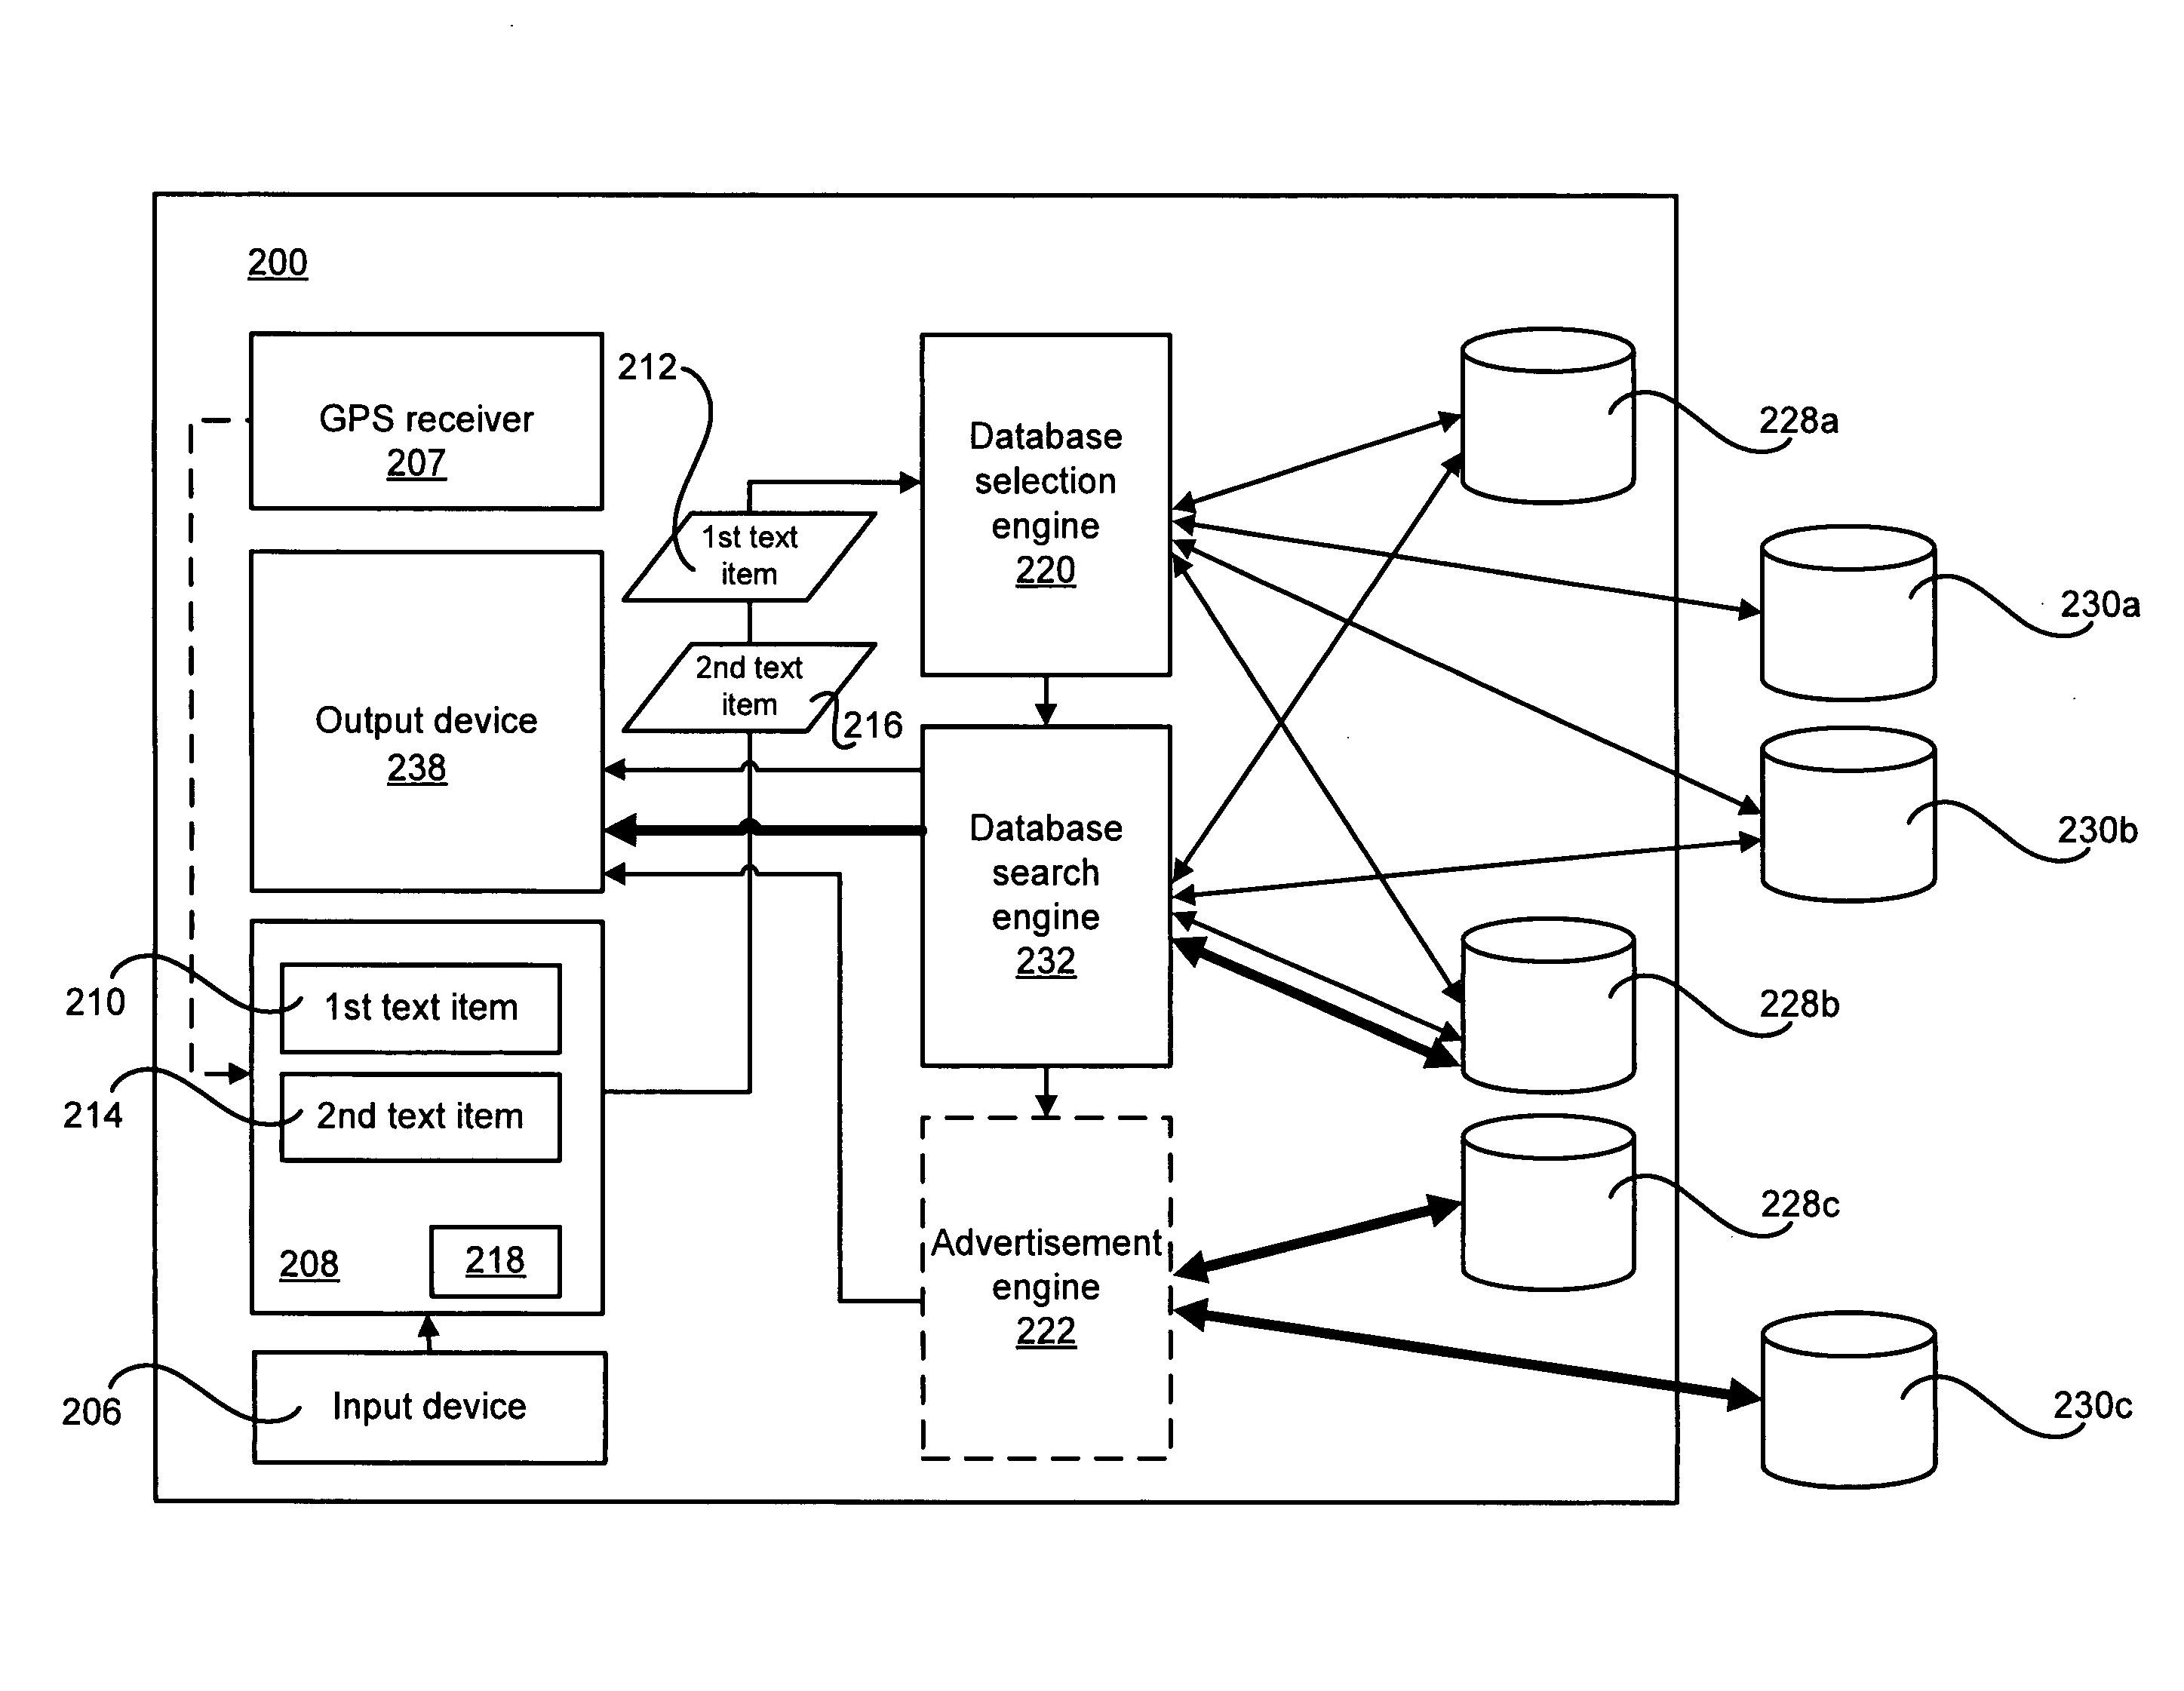 Apparatus and method for searching among and presenting information associated with geographical position data